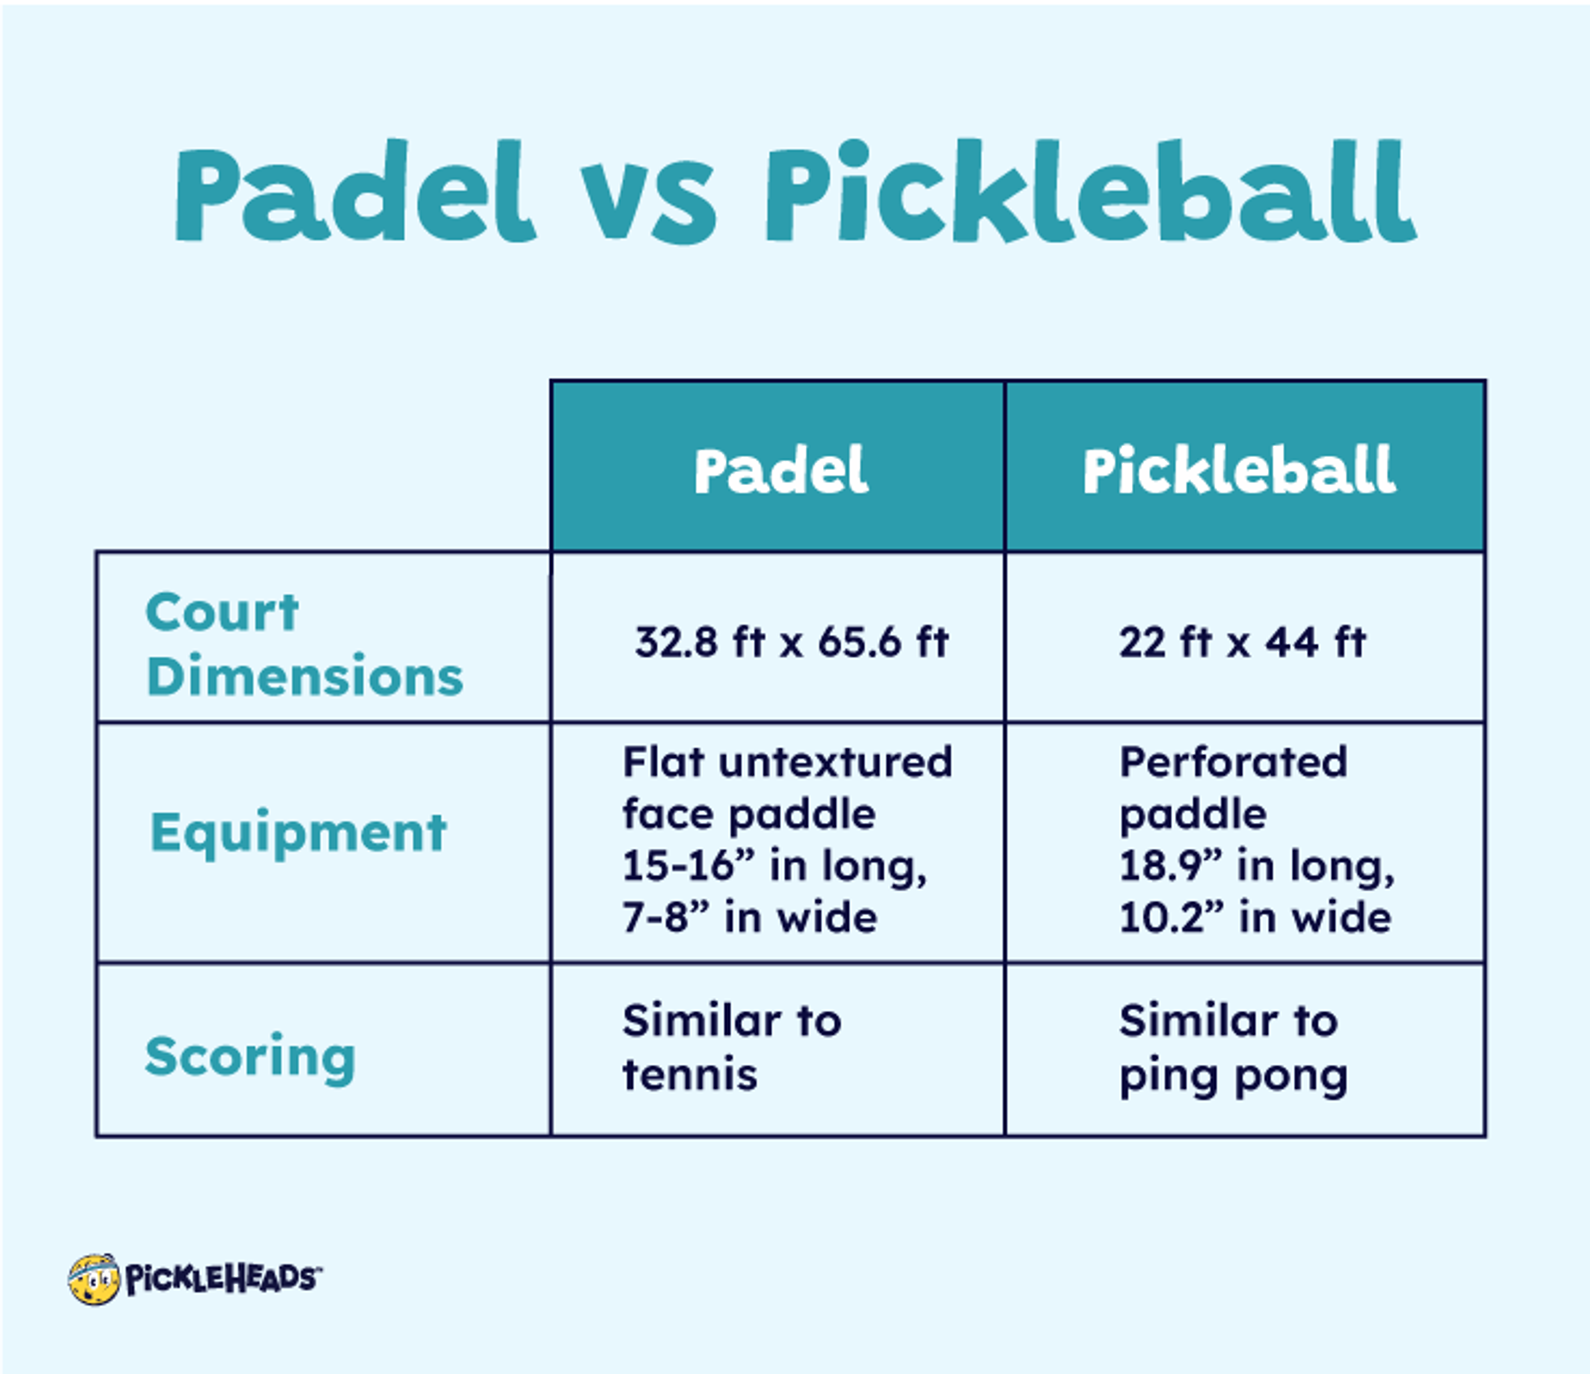 Graphic showing court dimensions, equipment, and scoring in padel vs pickleball